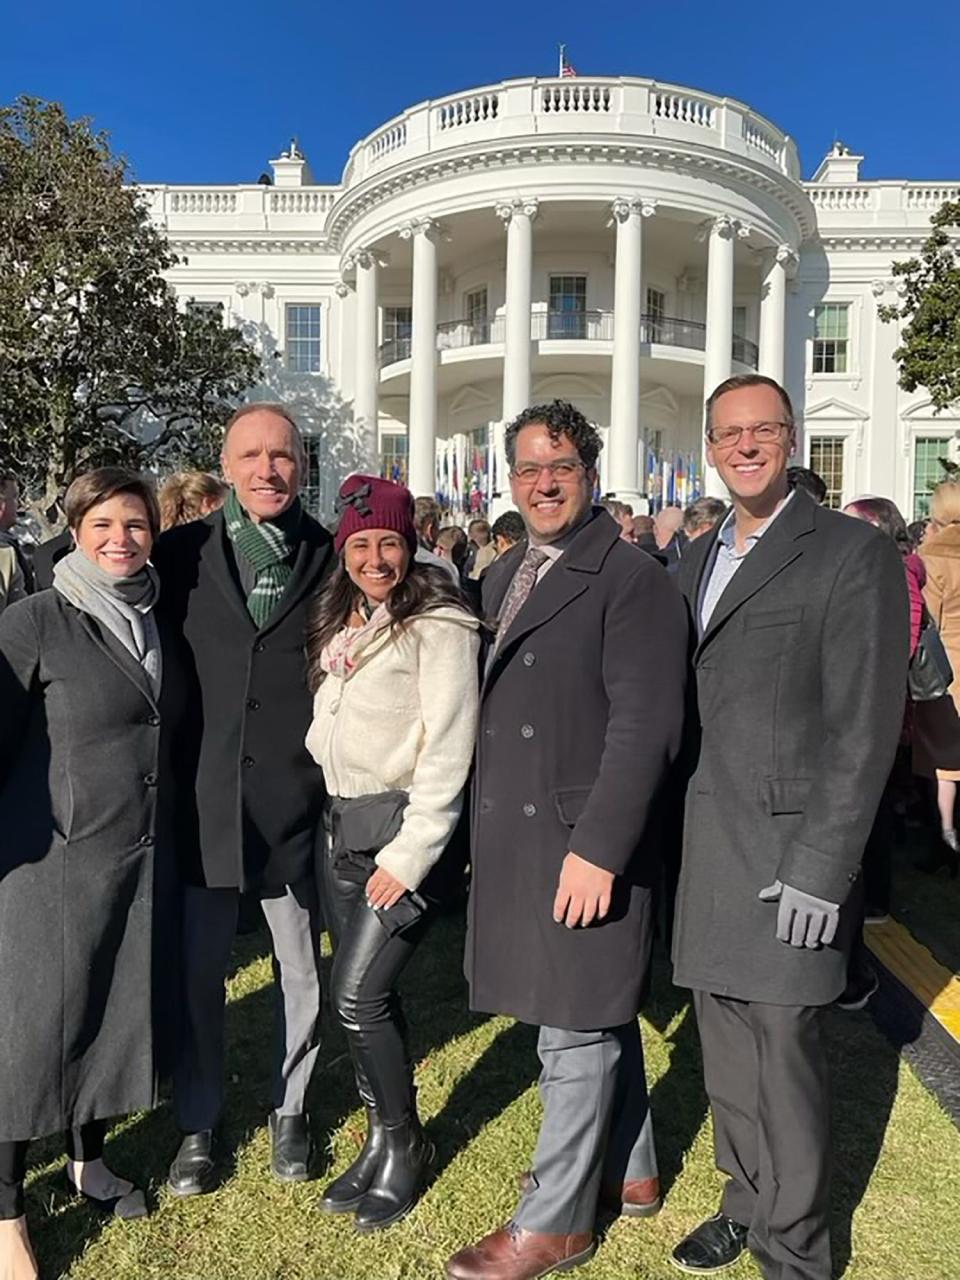 On the south lawn of the White House, these former and current elected officials from Michigan celebrate the Respect for Marriage Act after watching President Joe Biden sign the law on Tuesday, Dec. 13, 2022. From left are State Rep. Laurie Pohutsky, D-Livonia; Oakland County Executive Dave Coulter; State Rep. Mari Manoogian, D-Birmingham; Jason Franklin, a political consultant; and State Rep. Jon Hoadley, D-Kalamazoo.